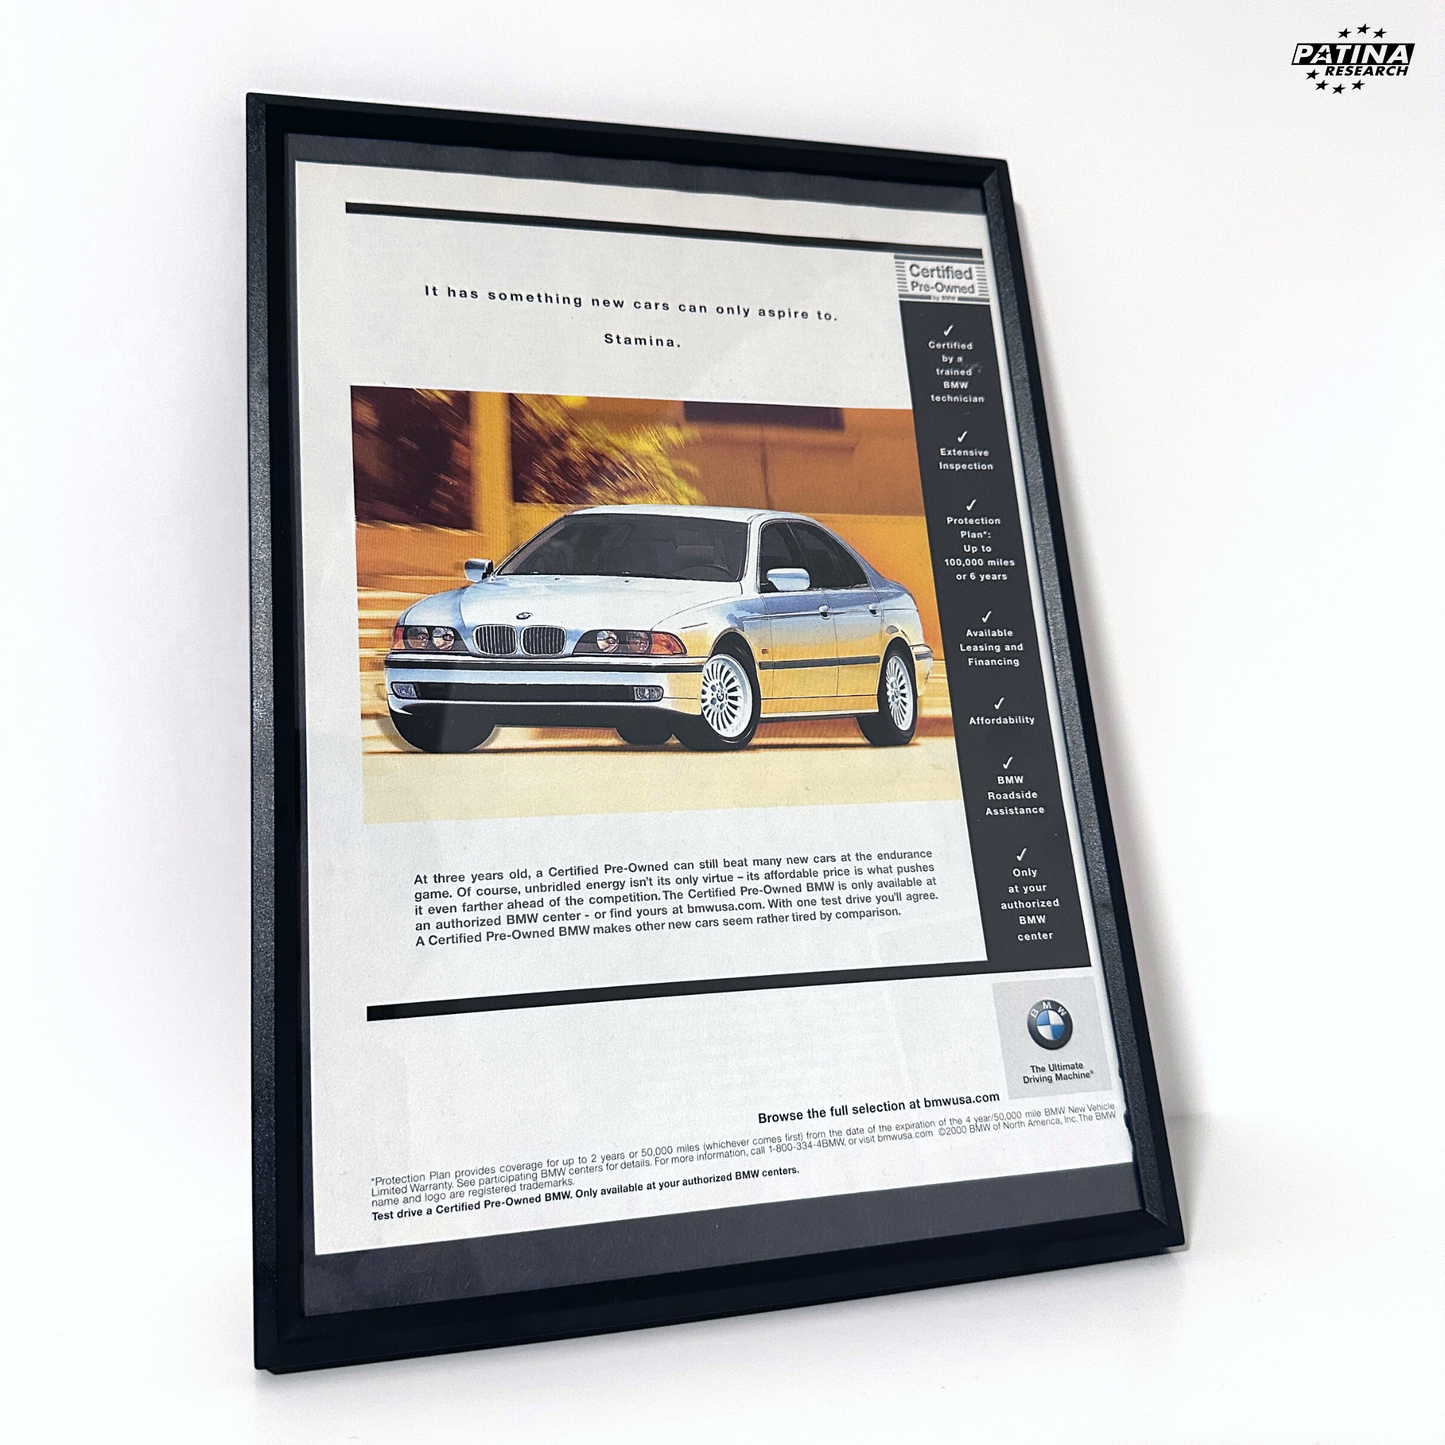 Bmw e39 it has something new cars framed ad